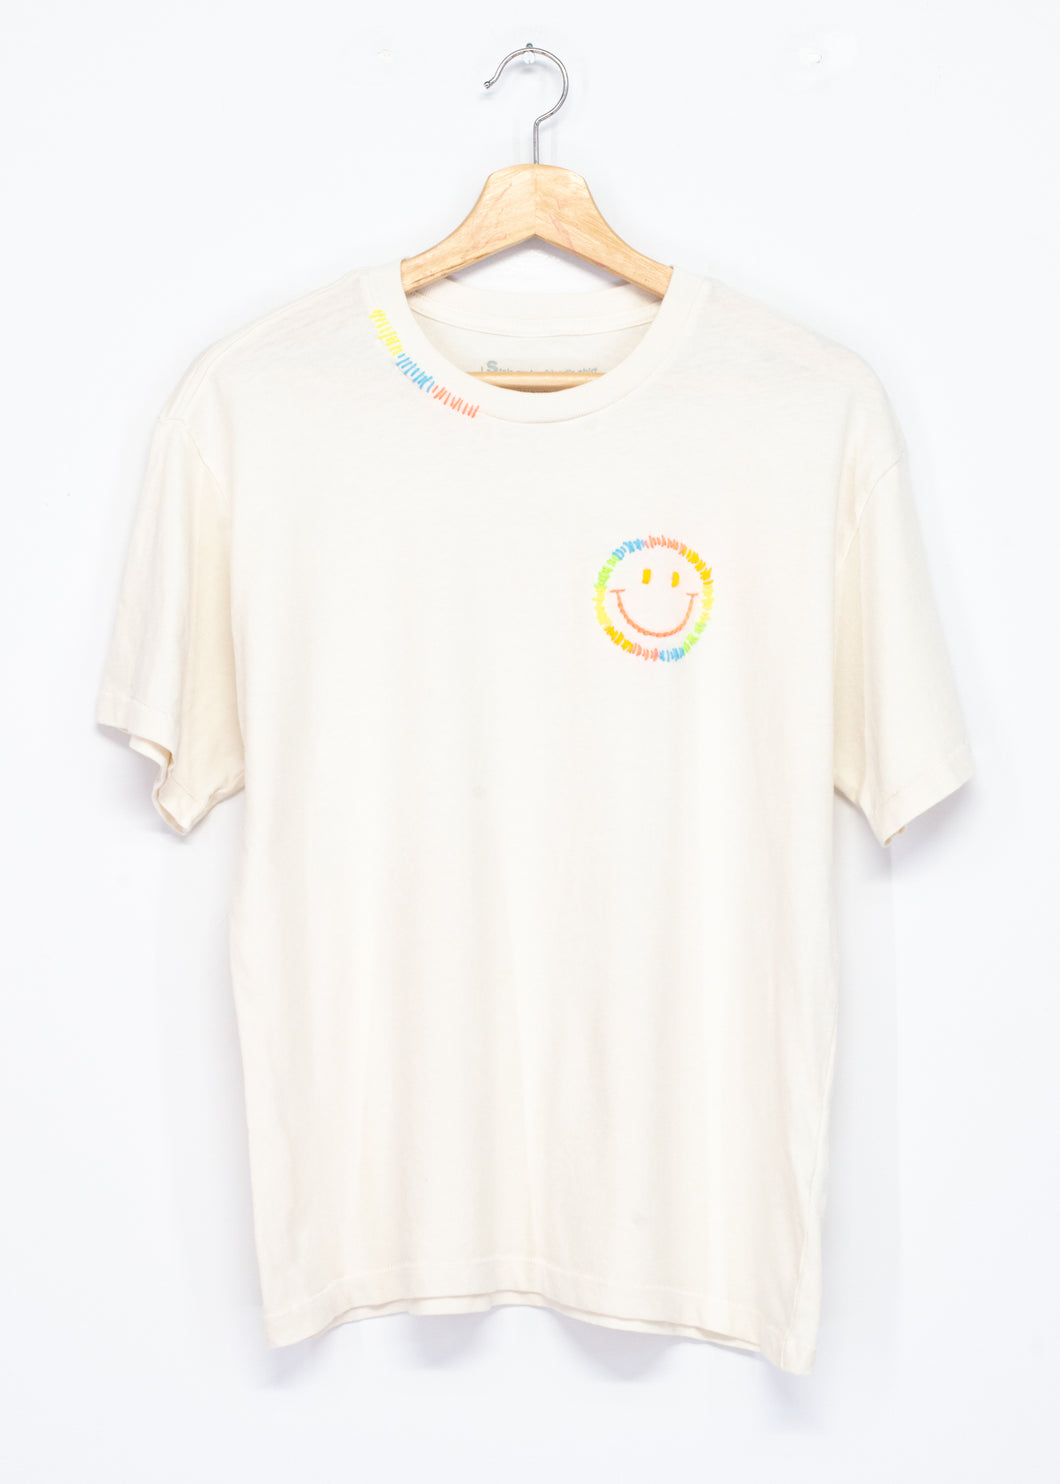 Neon Smiley Face Tee(2 Colors)